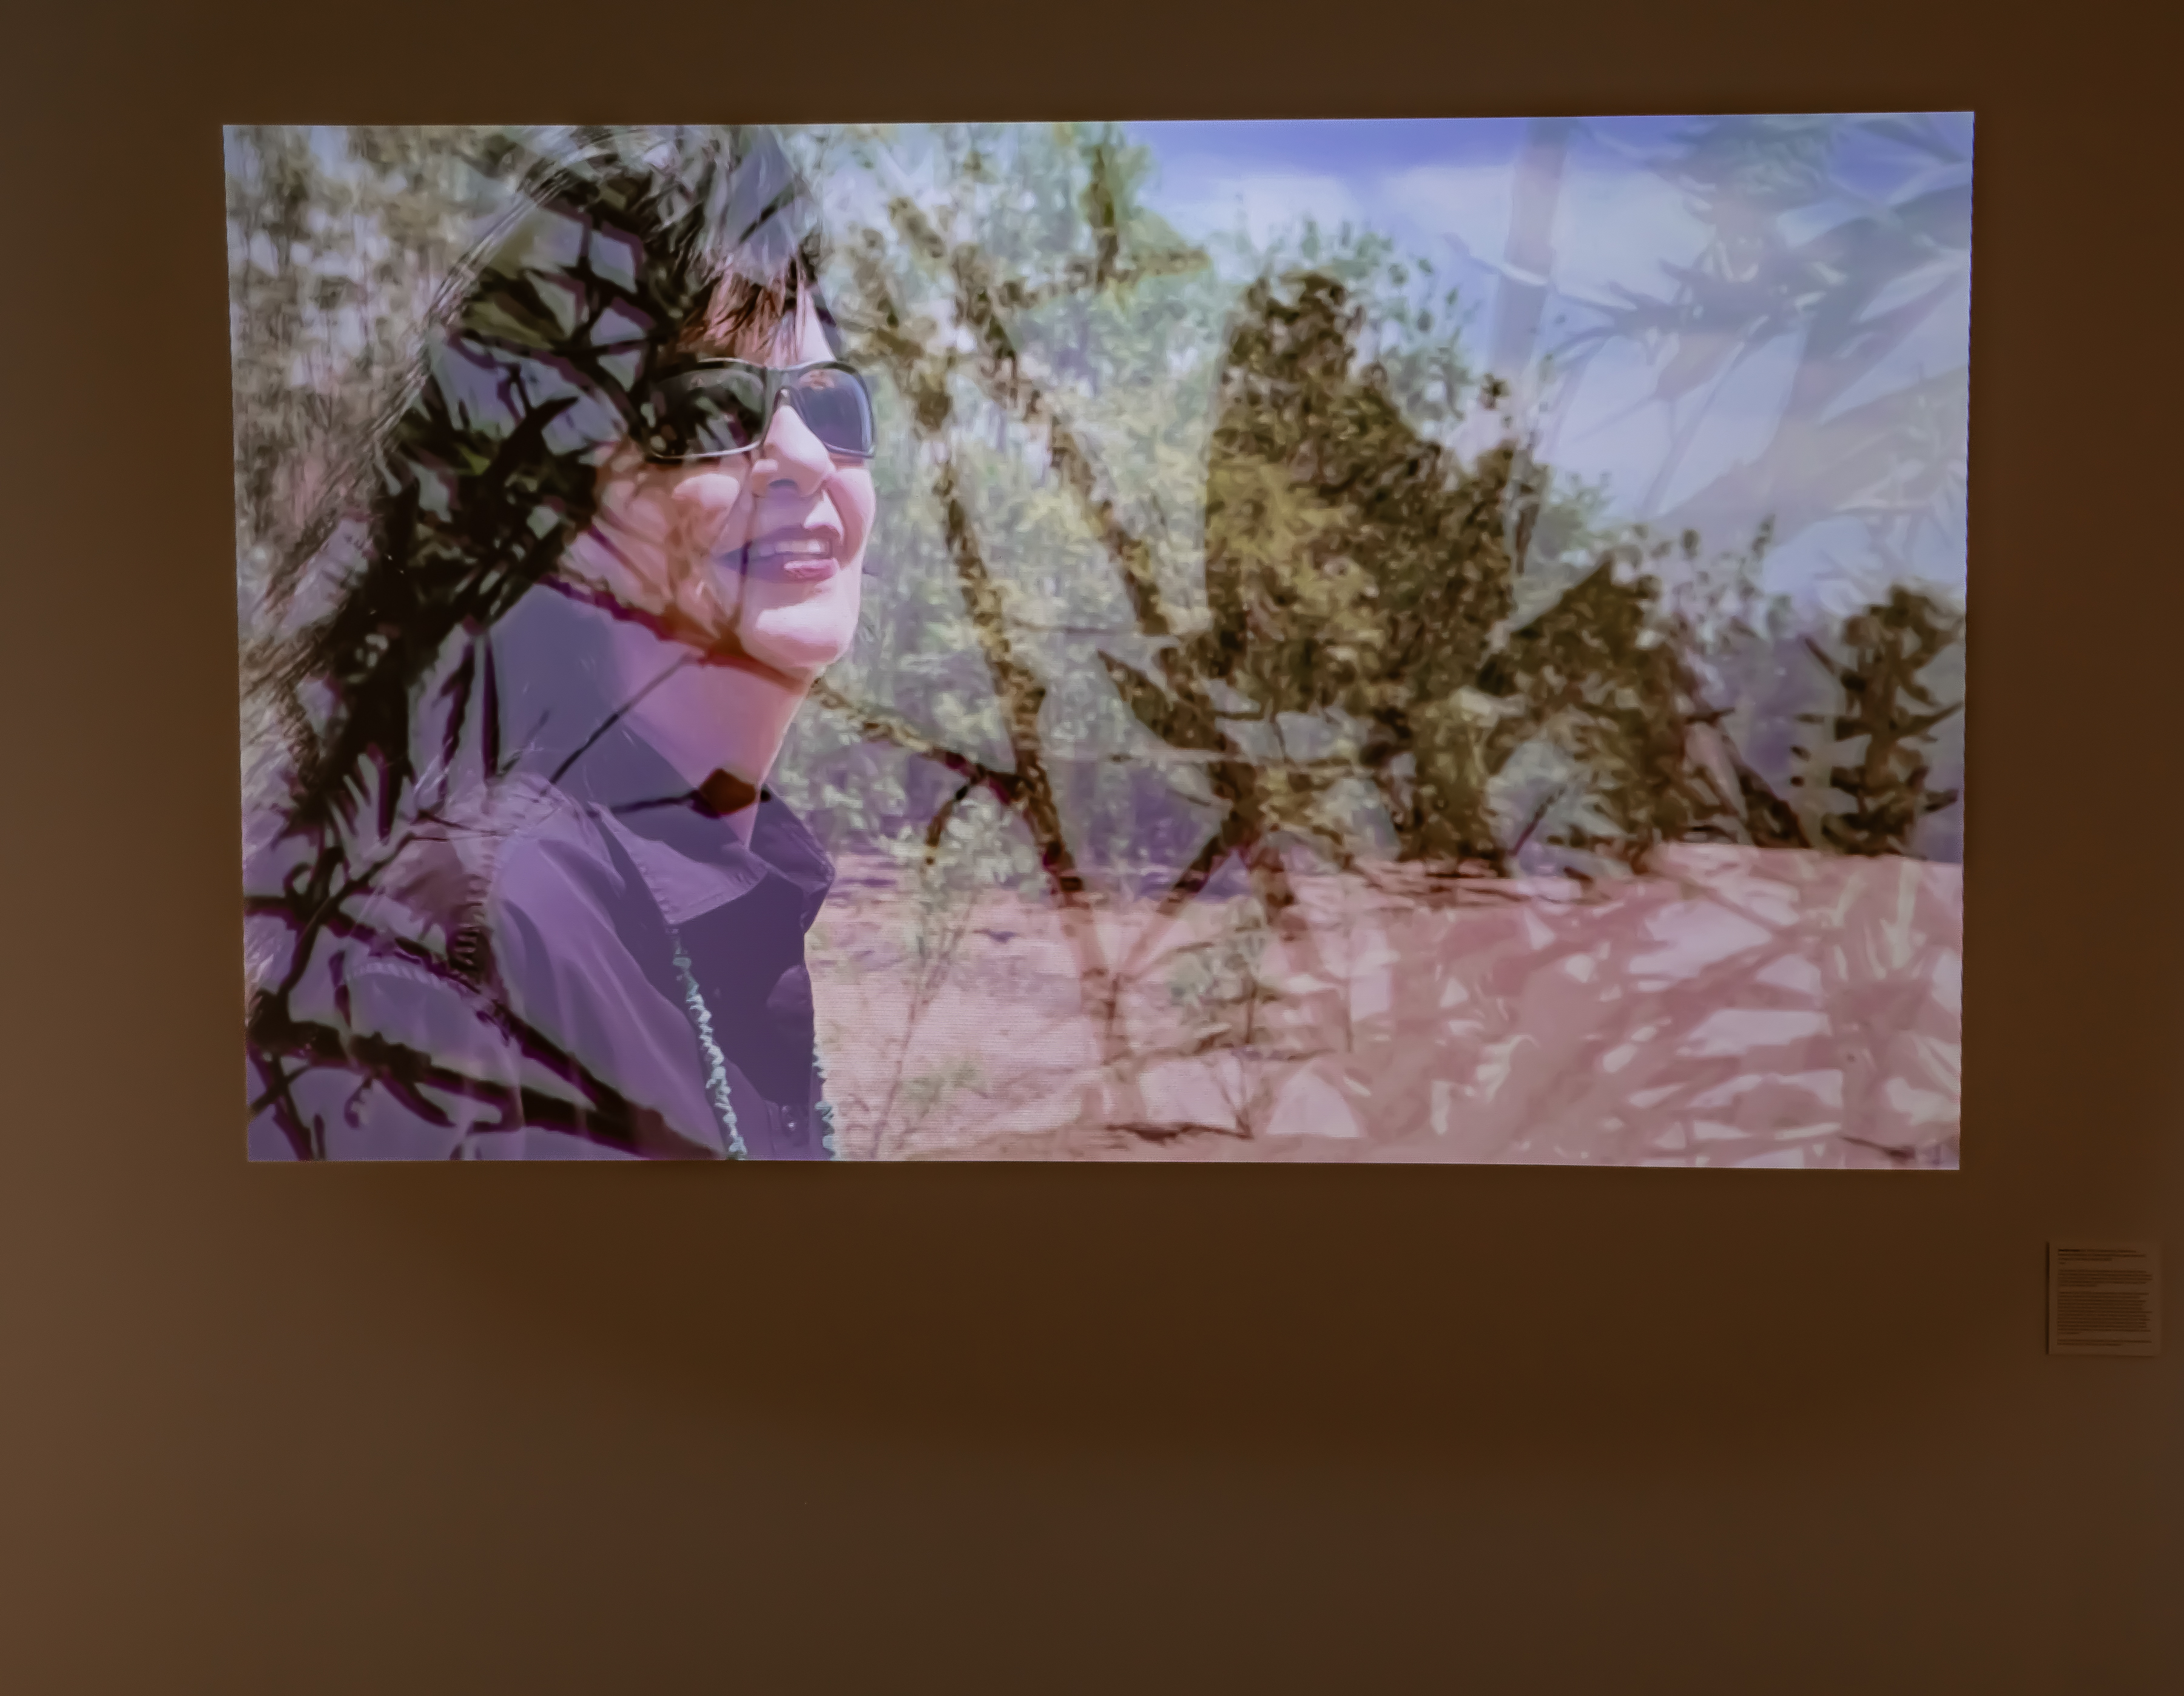 A projected image transitioning between a smiling woman in a black shirt and sunglasses and a close up image of plants